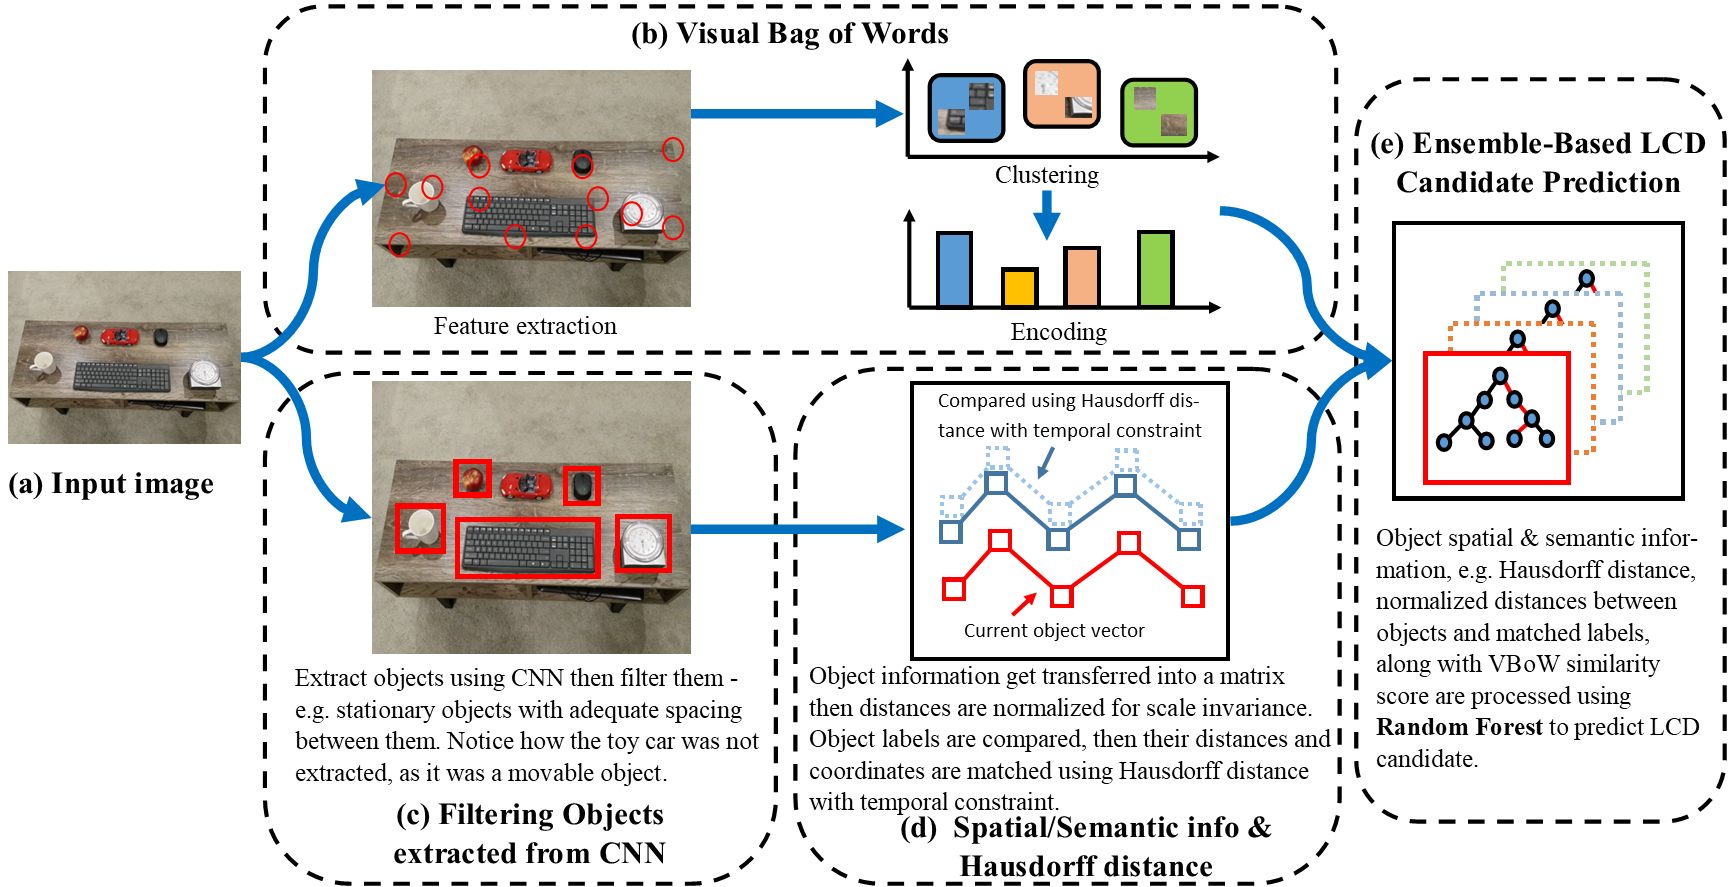 SymbioLCD: Ensemble-Based Loop Closure Detection using CNN-Extracted Objects and Visual Bag-of-Words